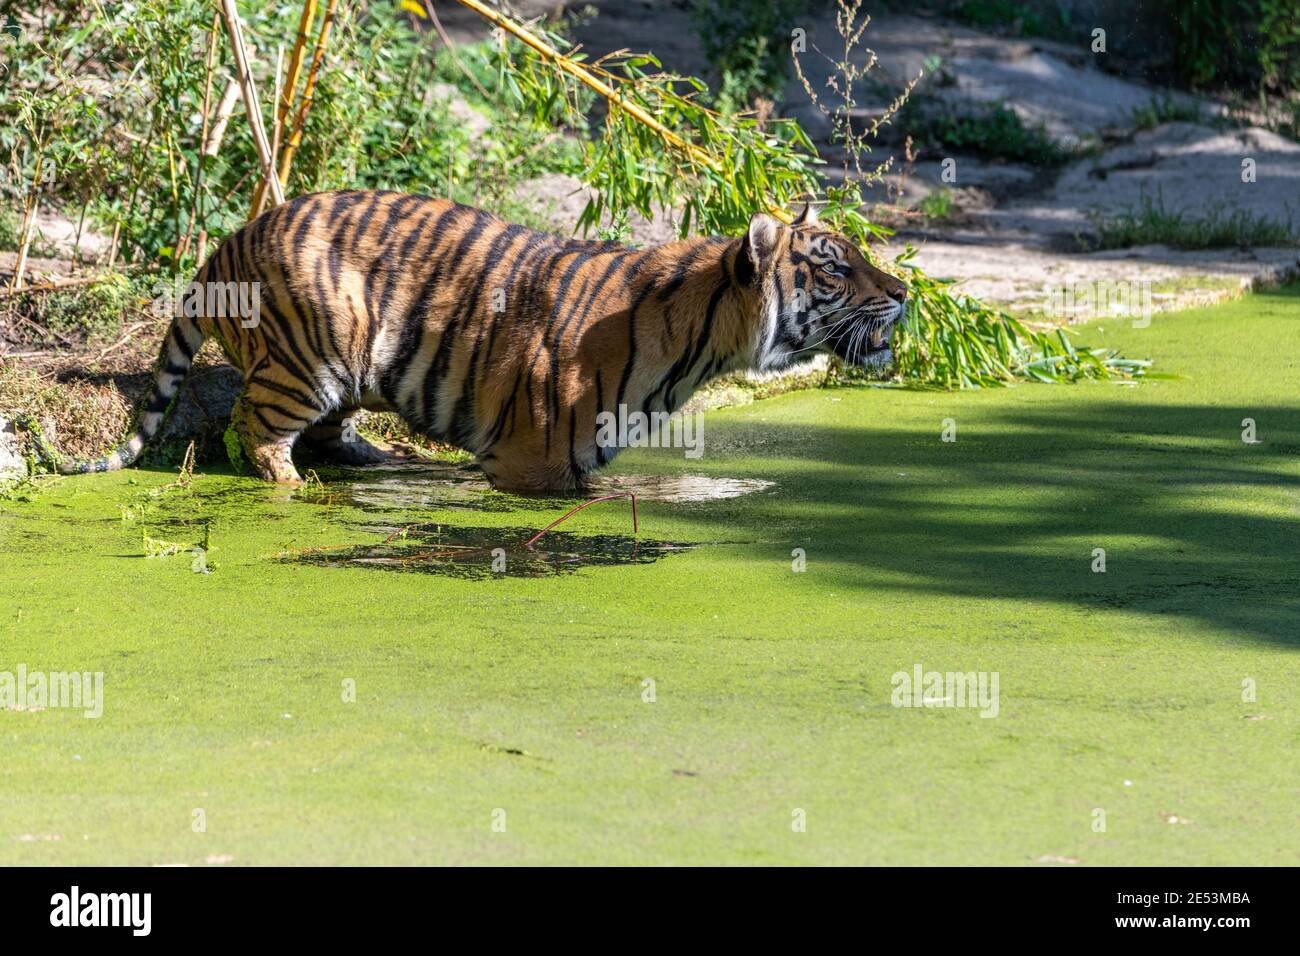 Tiger standing in in the water surrounded by common duckweed, looking upwards next to the land, having water lentils on him Stock Photo